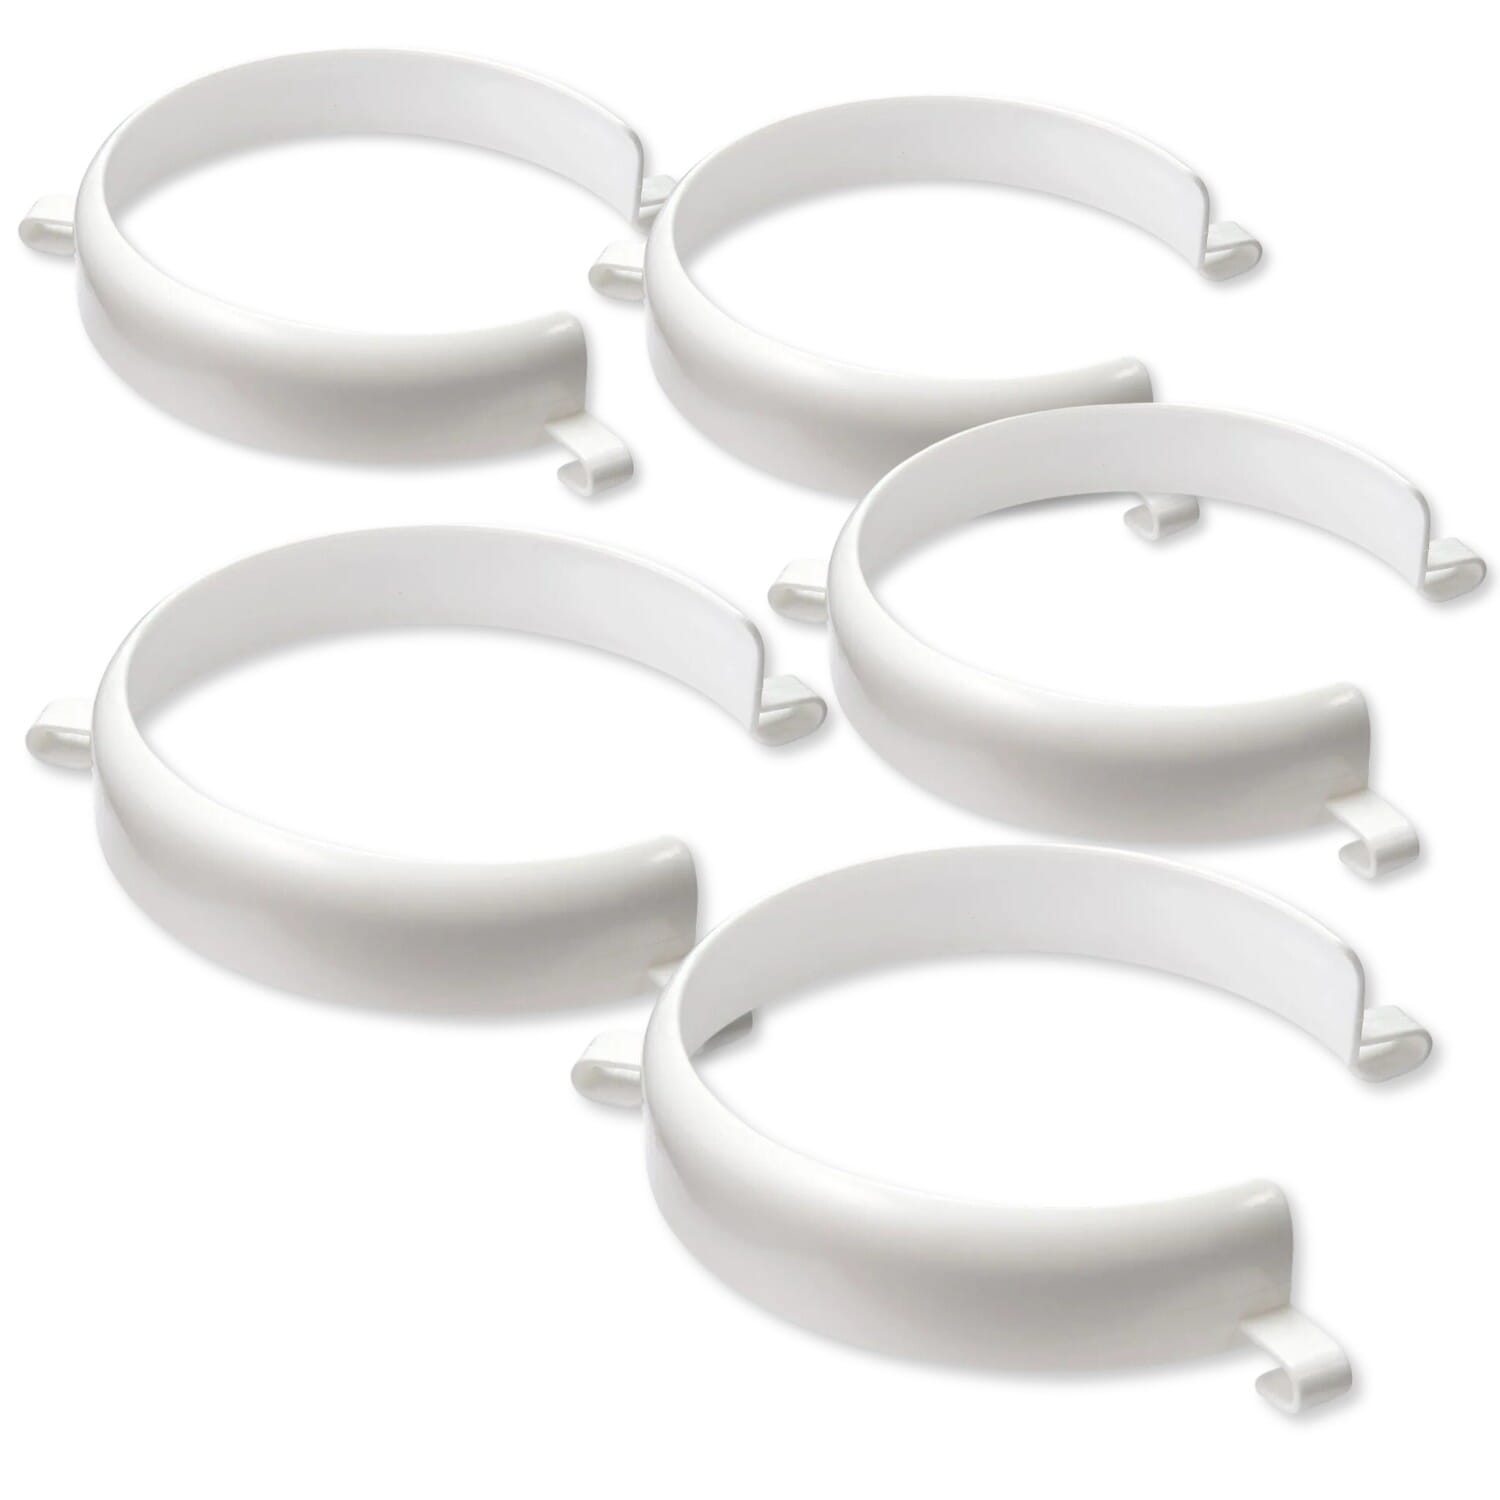 View Plate Surround Pack of 5 information